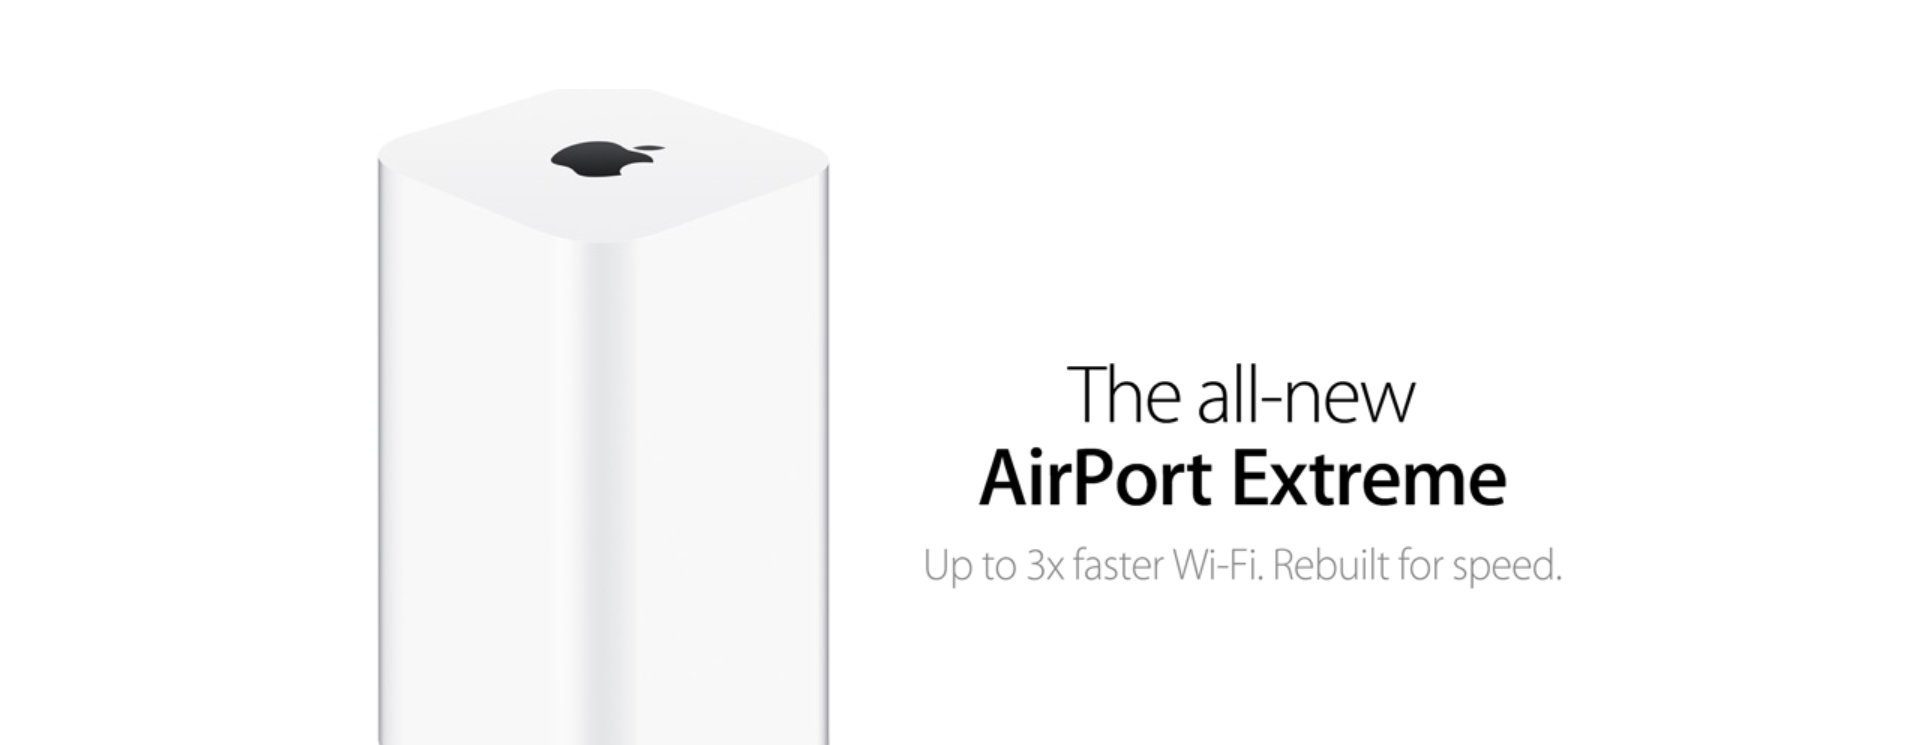 The New AirPort Extreme